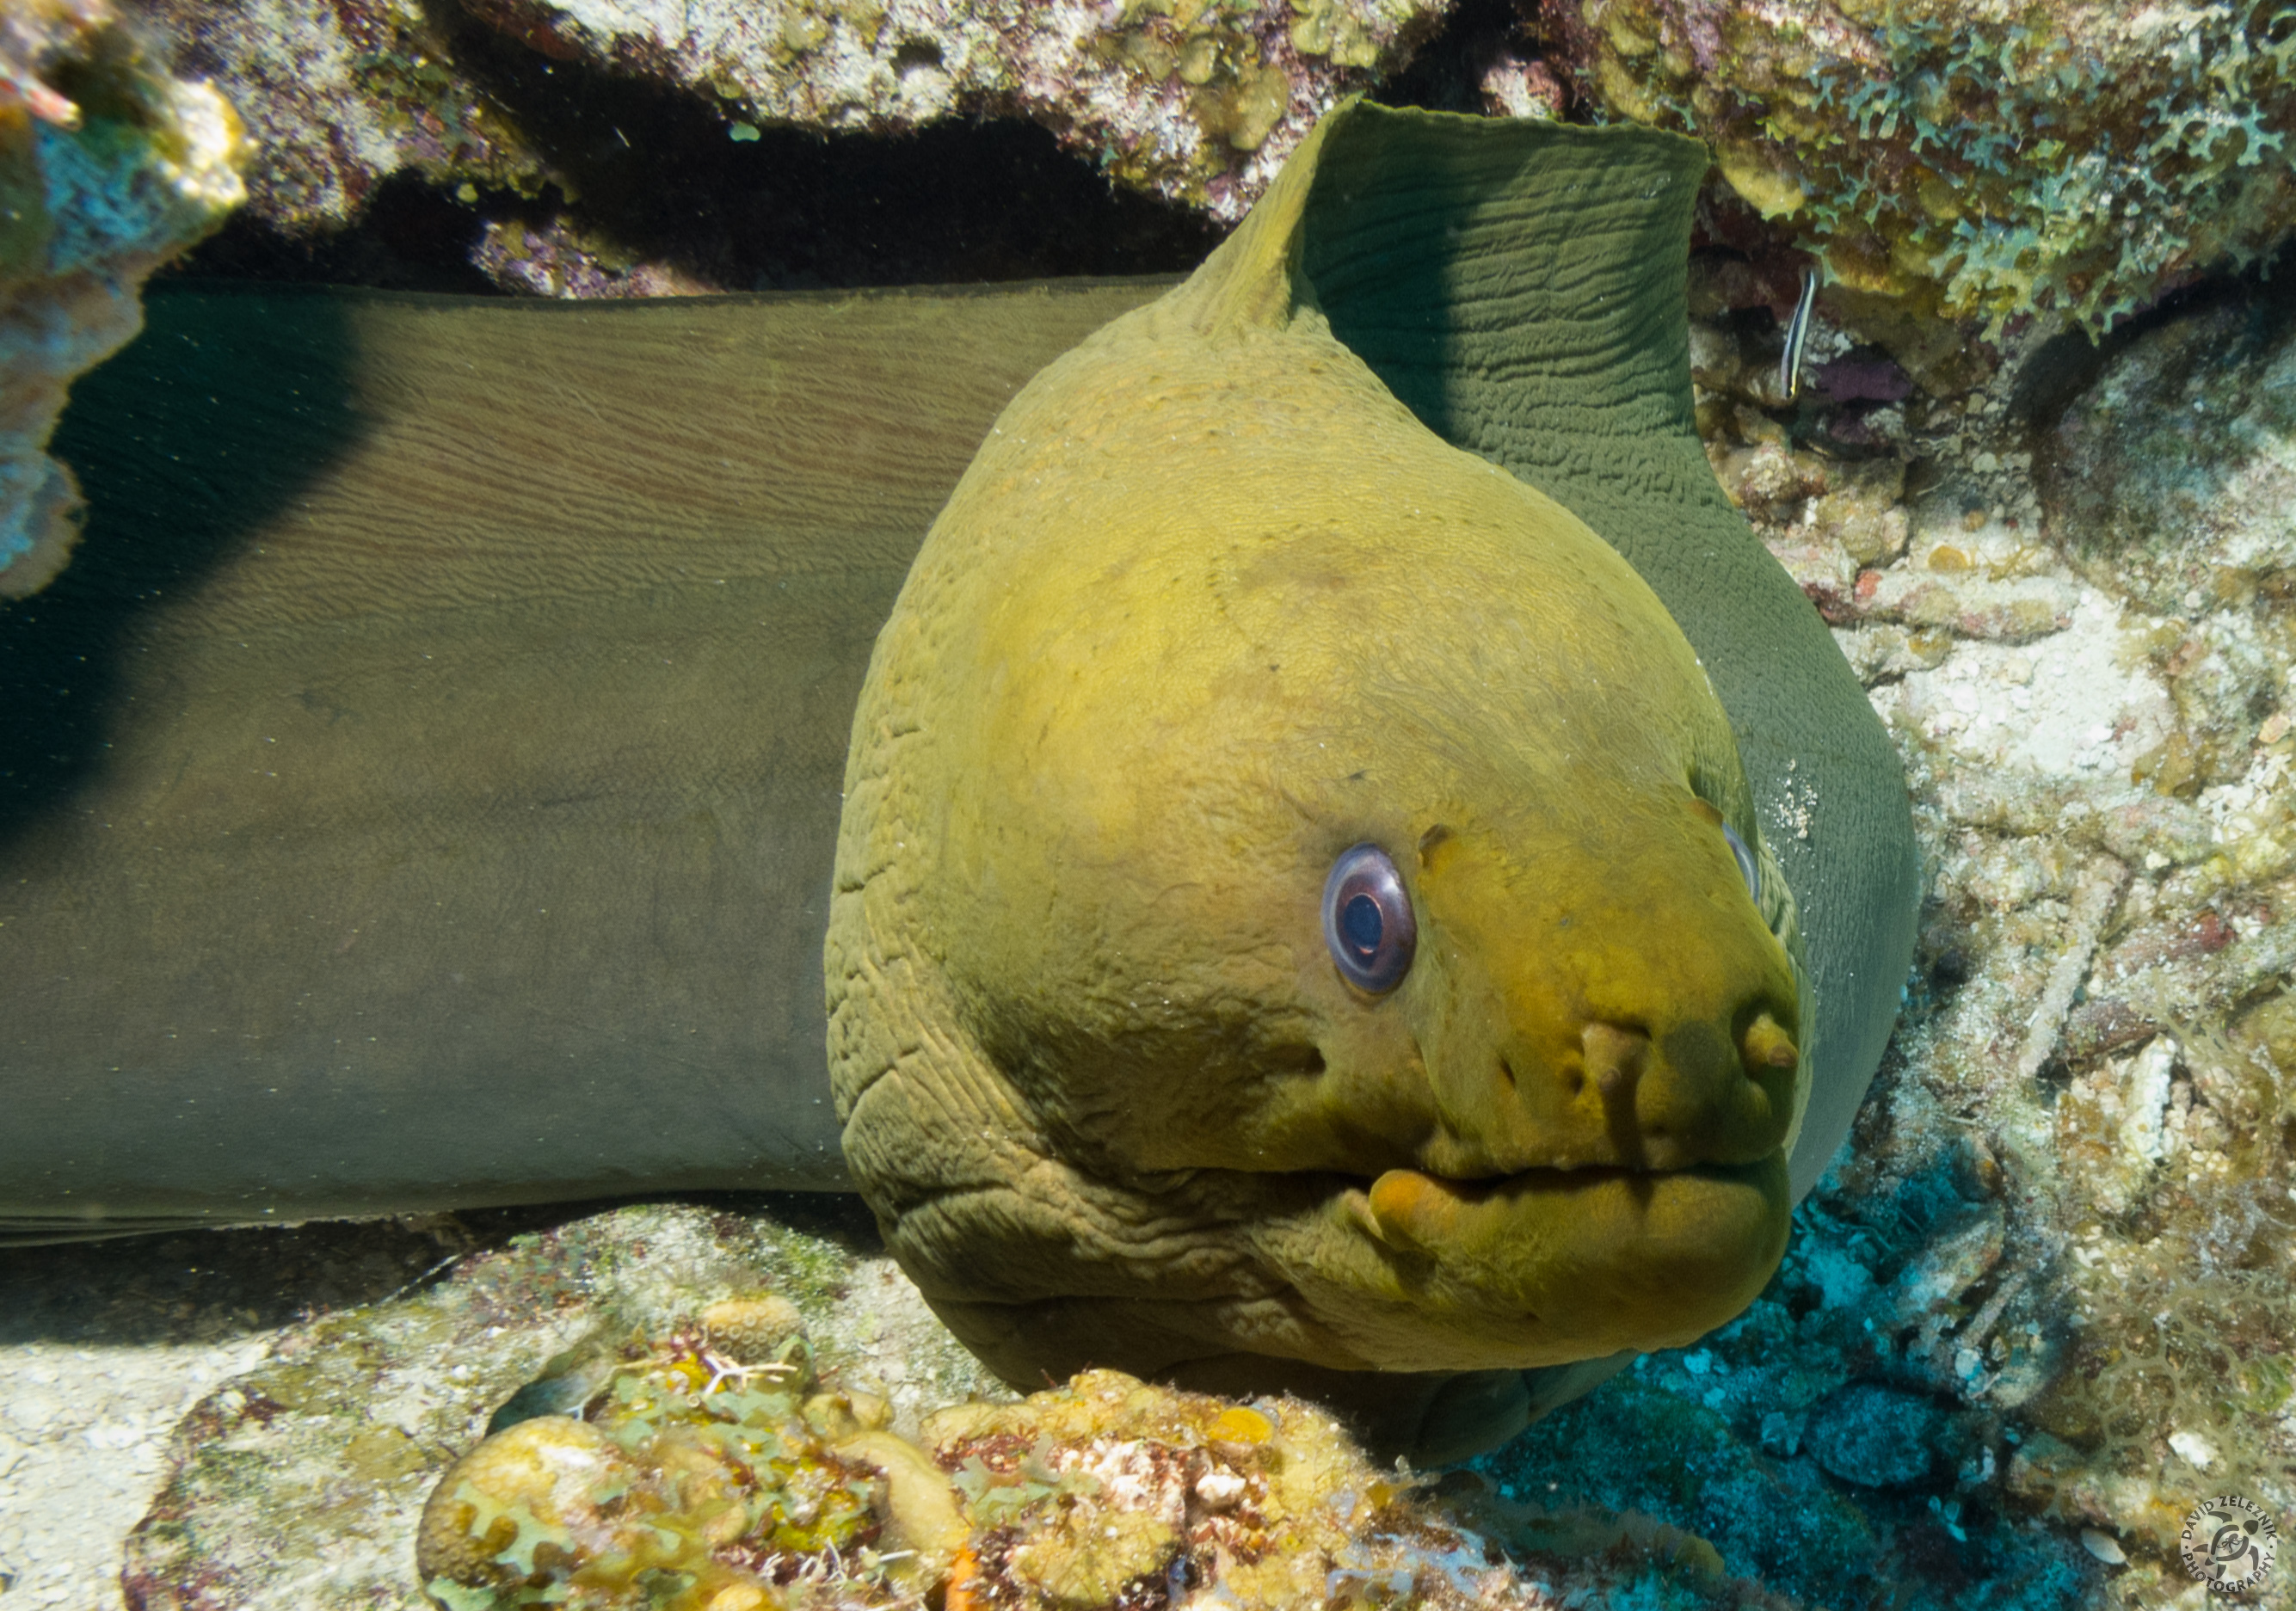 I started photographing this Green Moray when I noticed that he kept getting bigger in my viewfinder